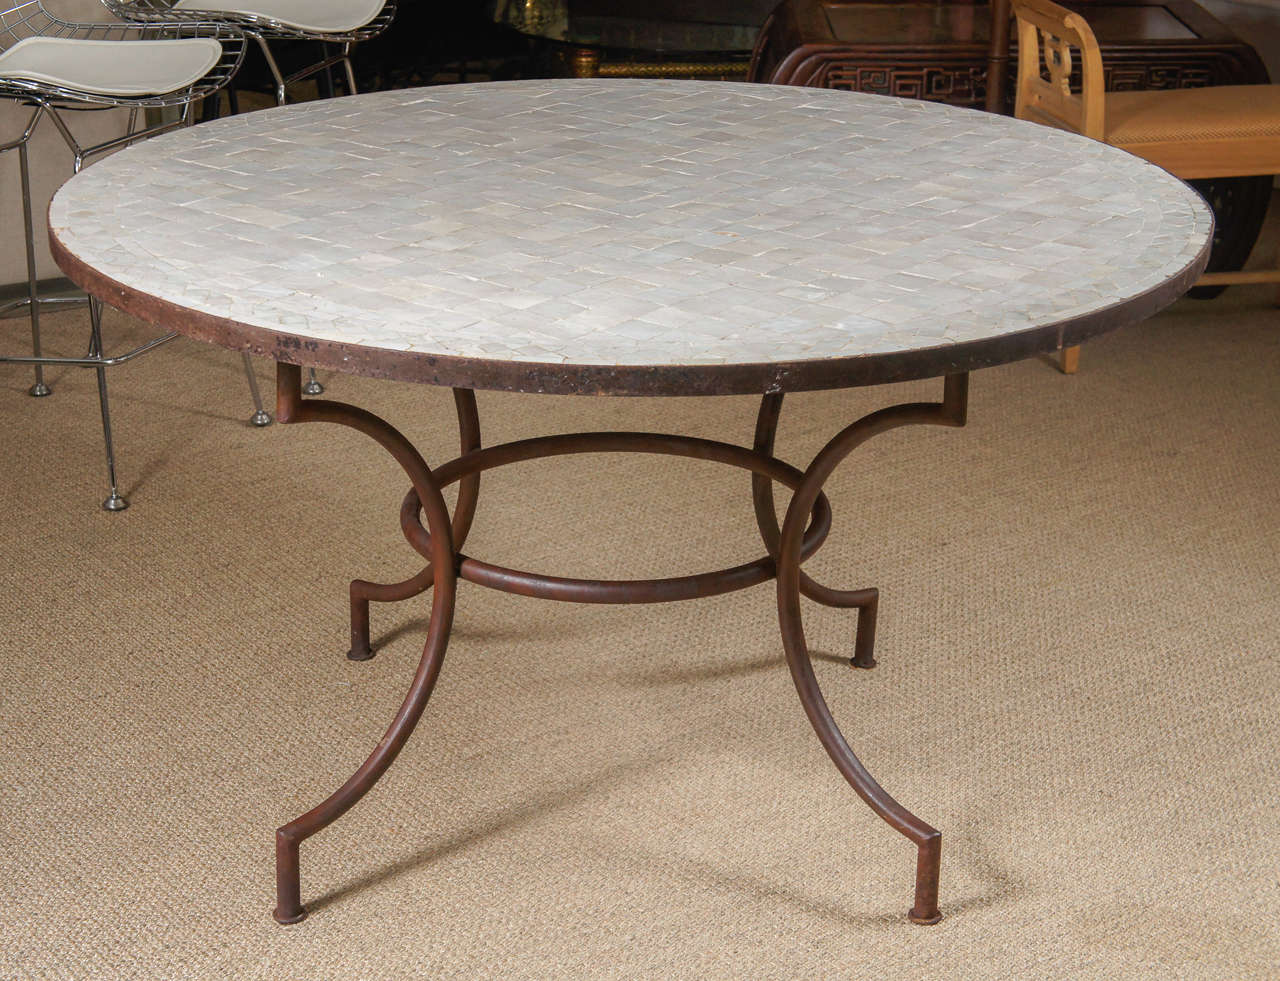 Here is a great mosaic tile top table with an iron base.